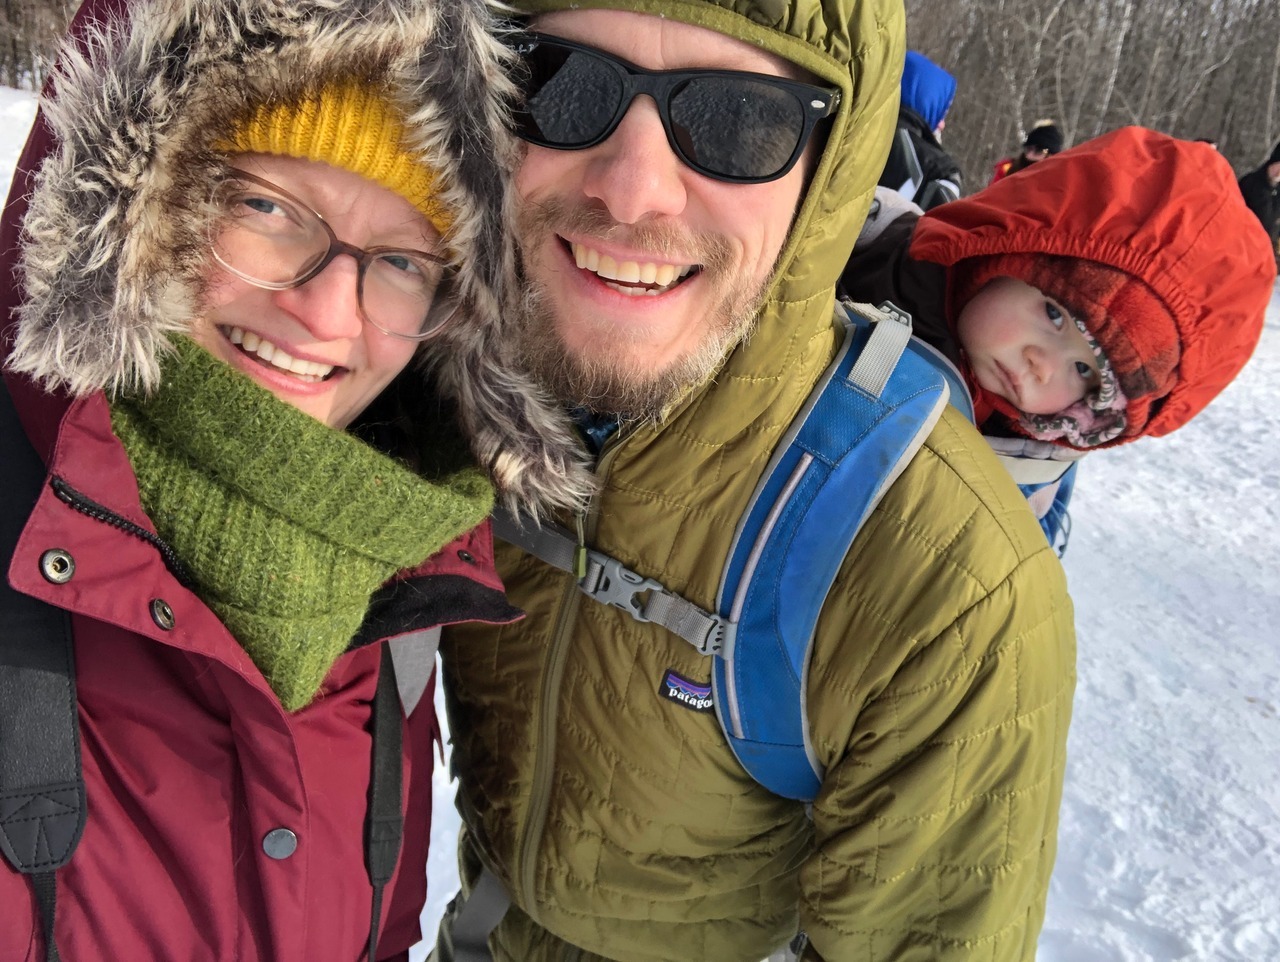 "Living in and caring for Minnesota means getting out in all of the elements and encouraging others to do the same." - #LovingWhereWeLive with @finland_headwaters⁠⁠Tap the link in bio to see how Kate & her family are being better stewards of our natural places.⁠⁠ — from Instagram